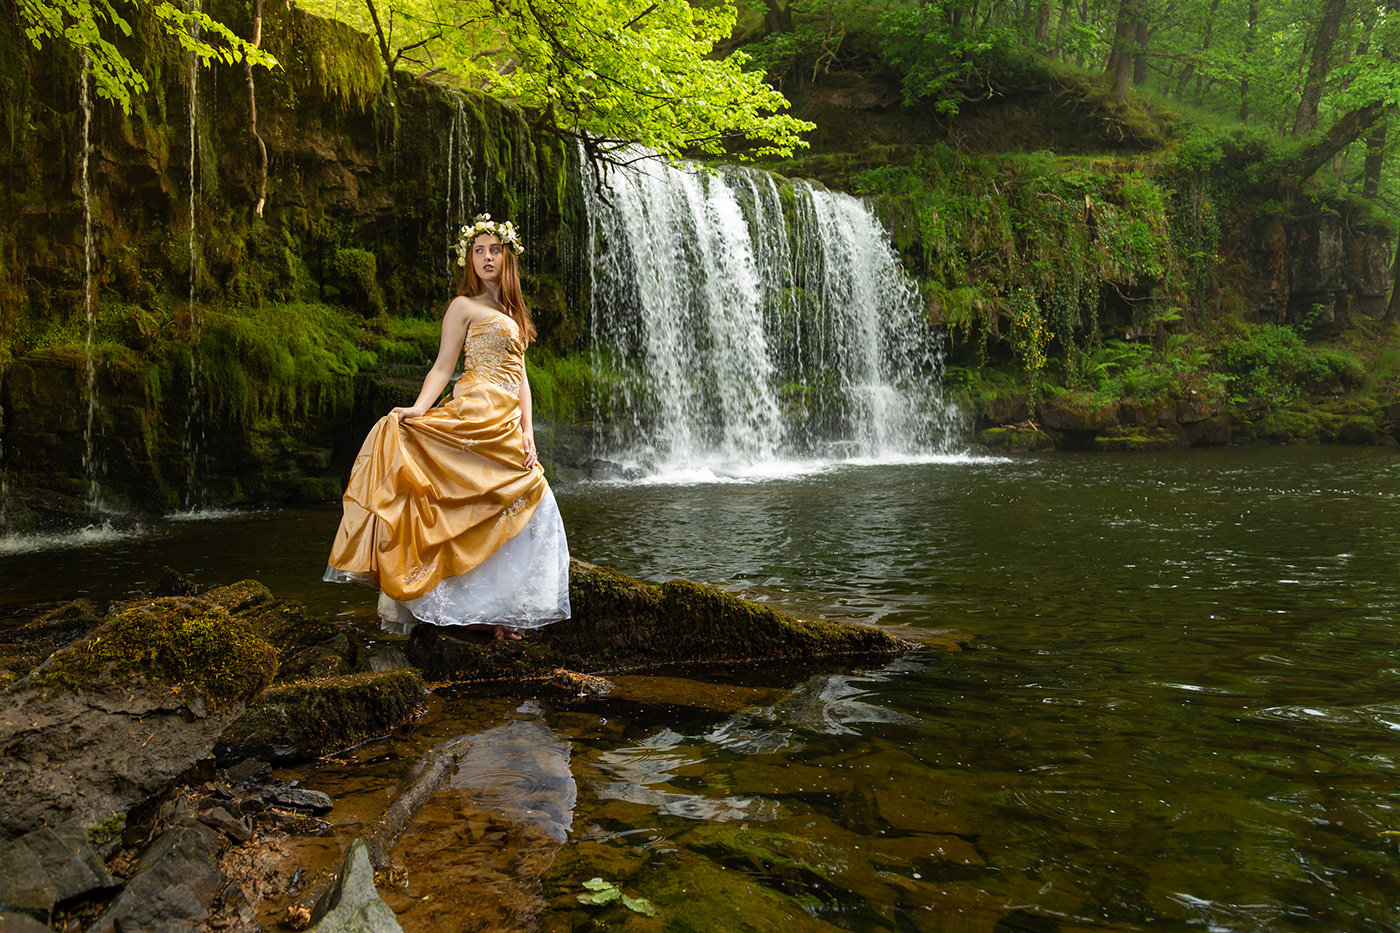 Beauty portraits in nature set against the waterfall and woodland in Wales